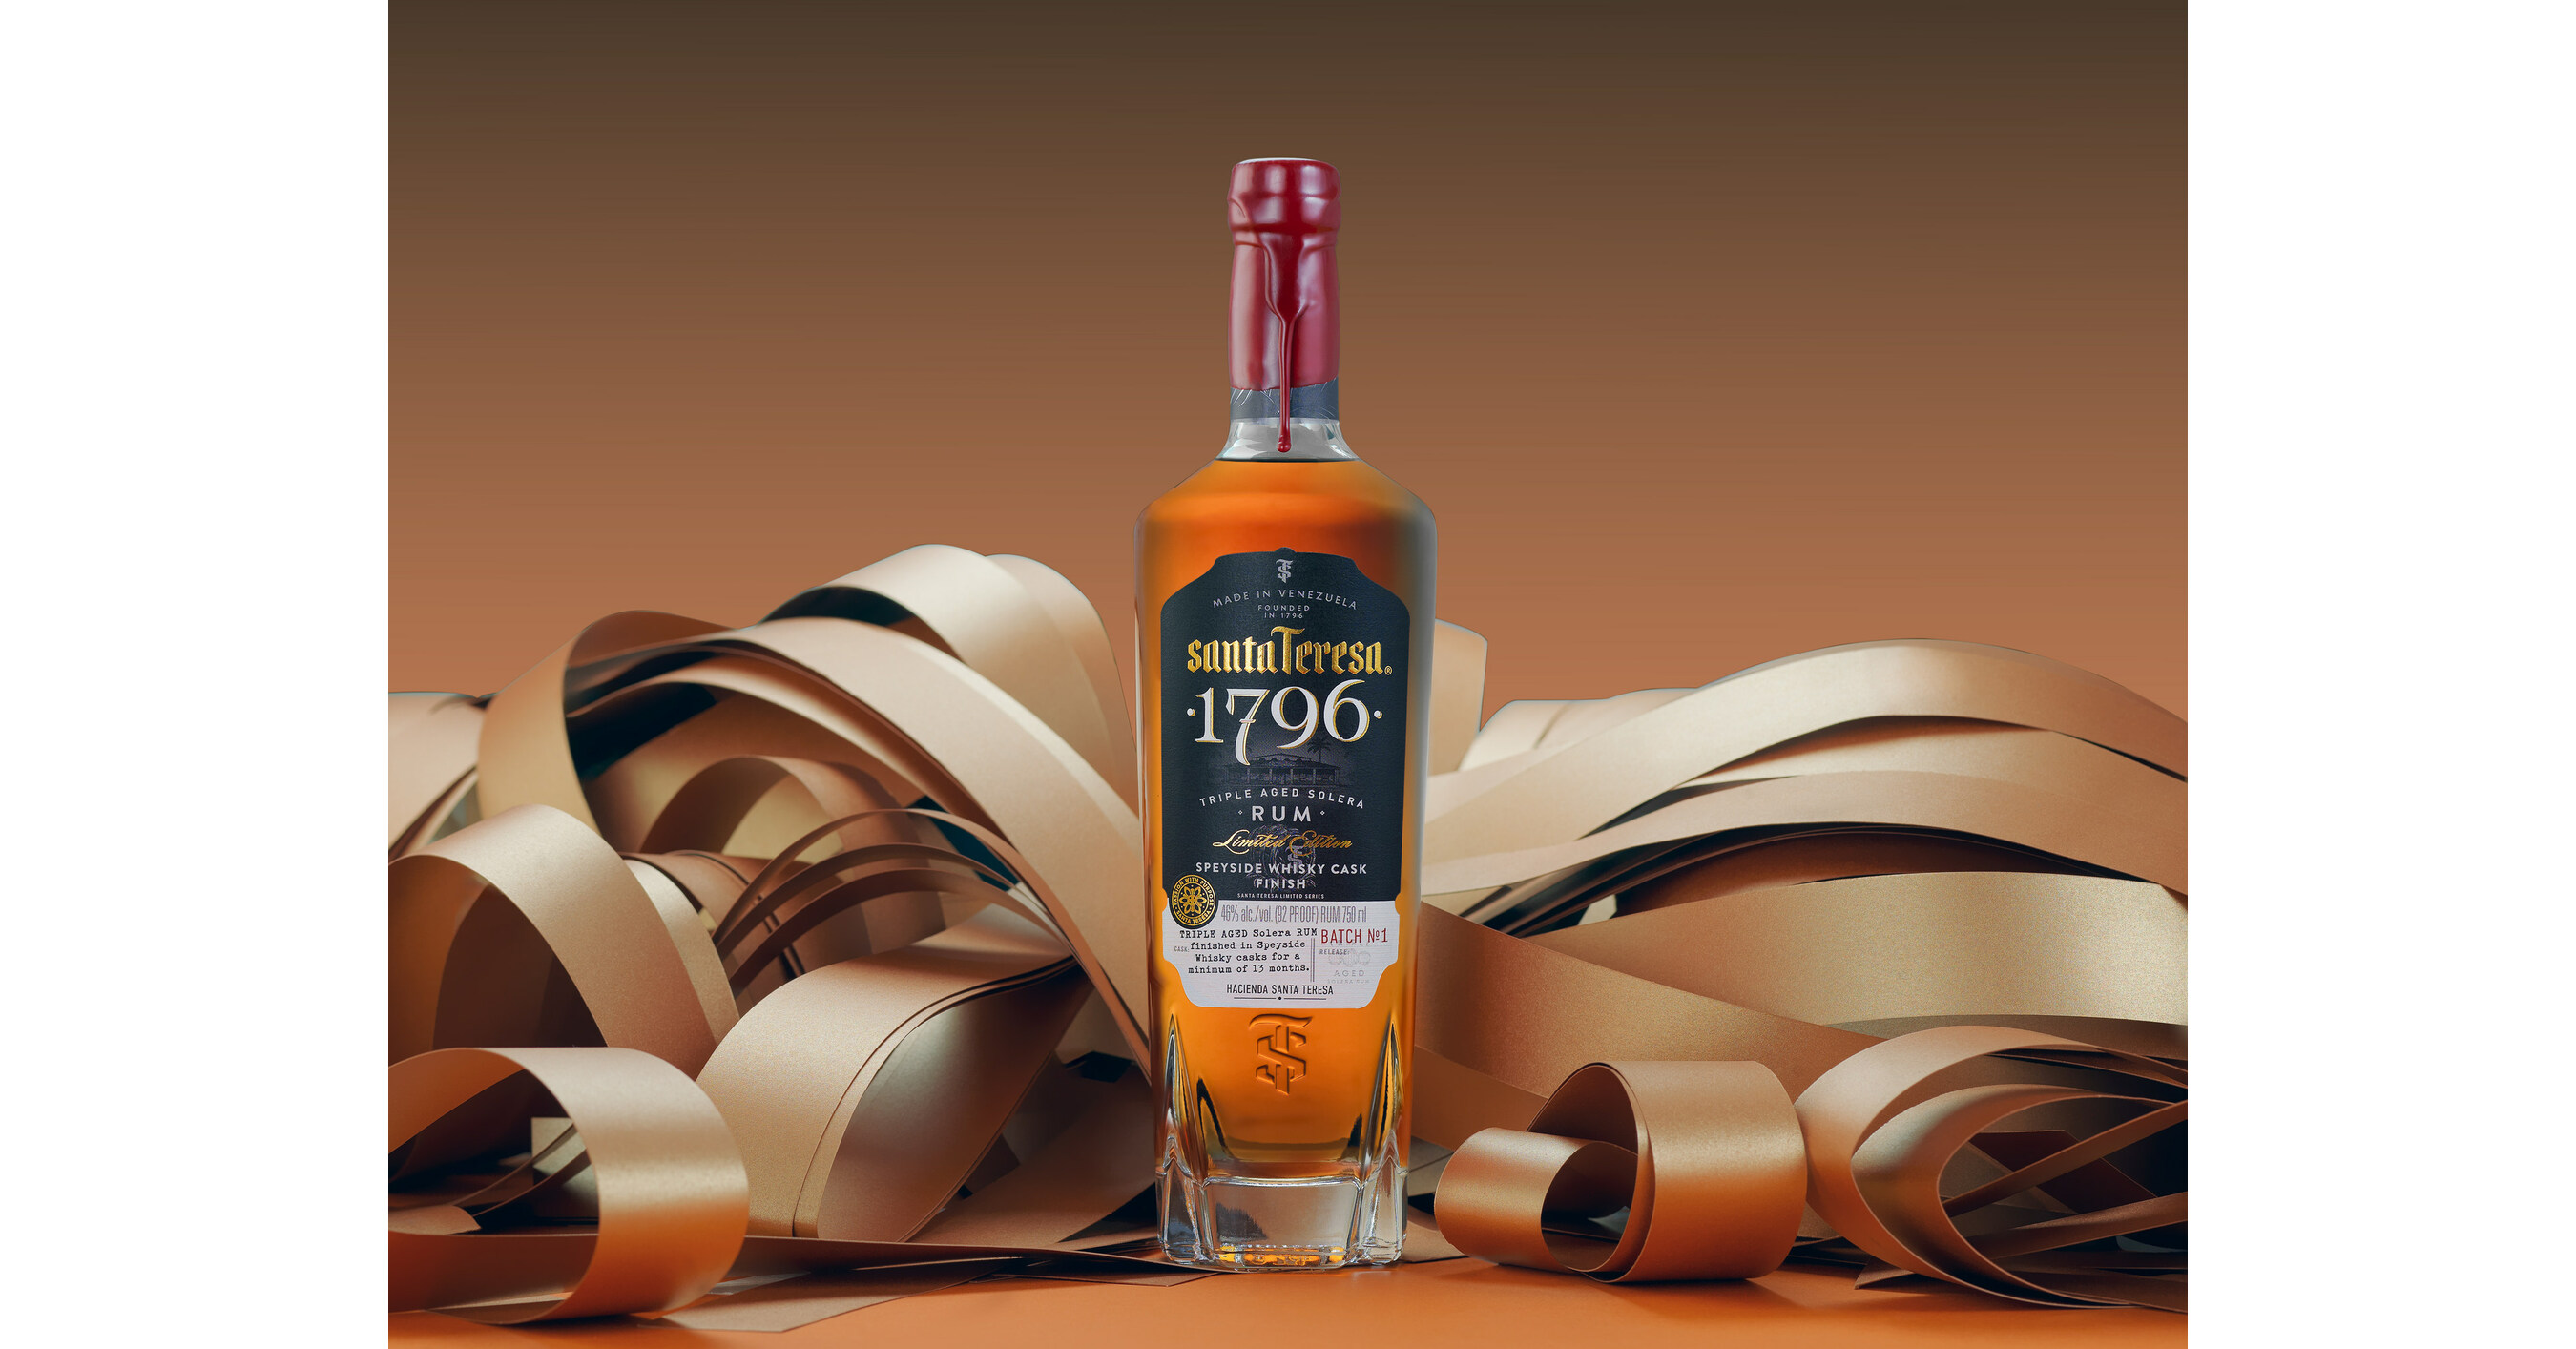 SANTA TERESA RUM LAUNCHES ITS FIRST LIMITED-EDITION EXPRESSION